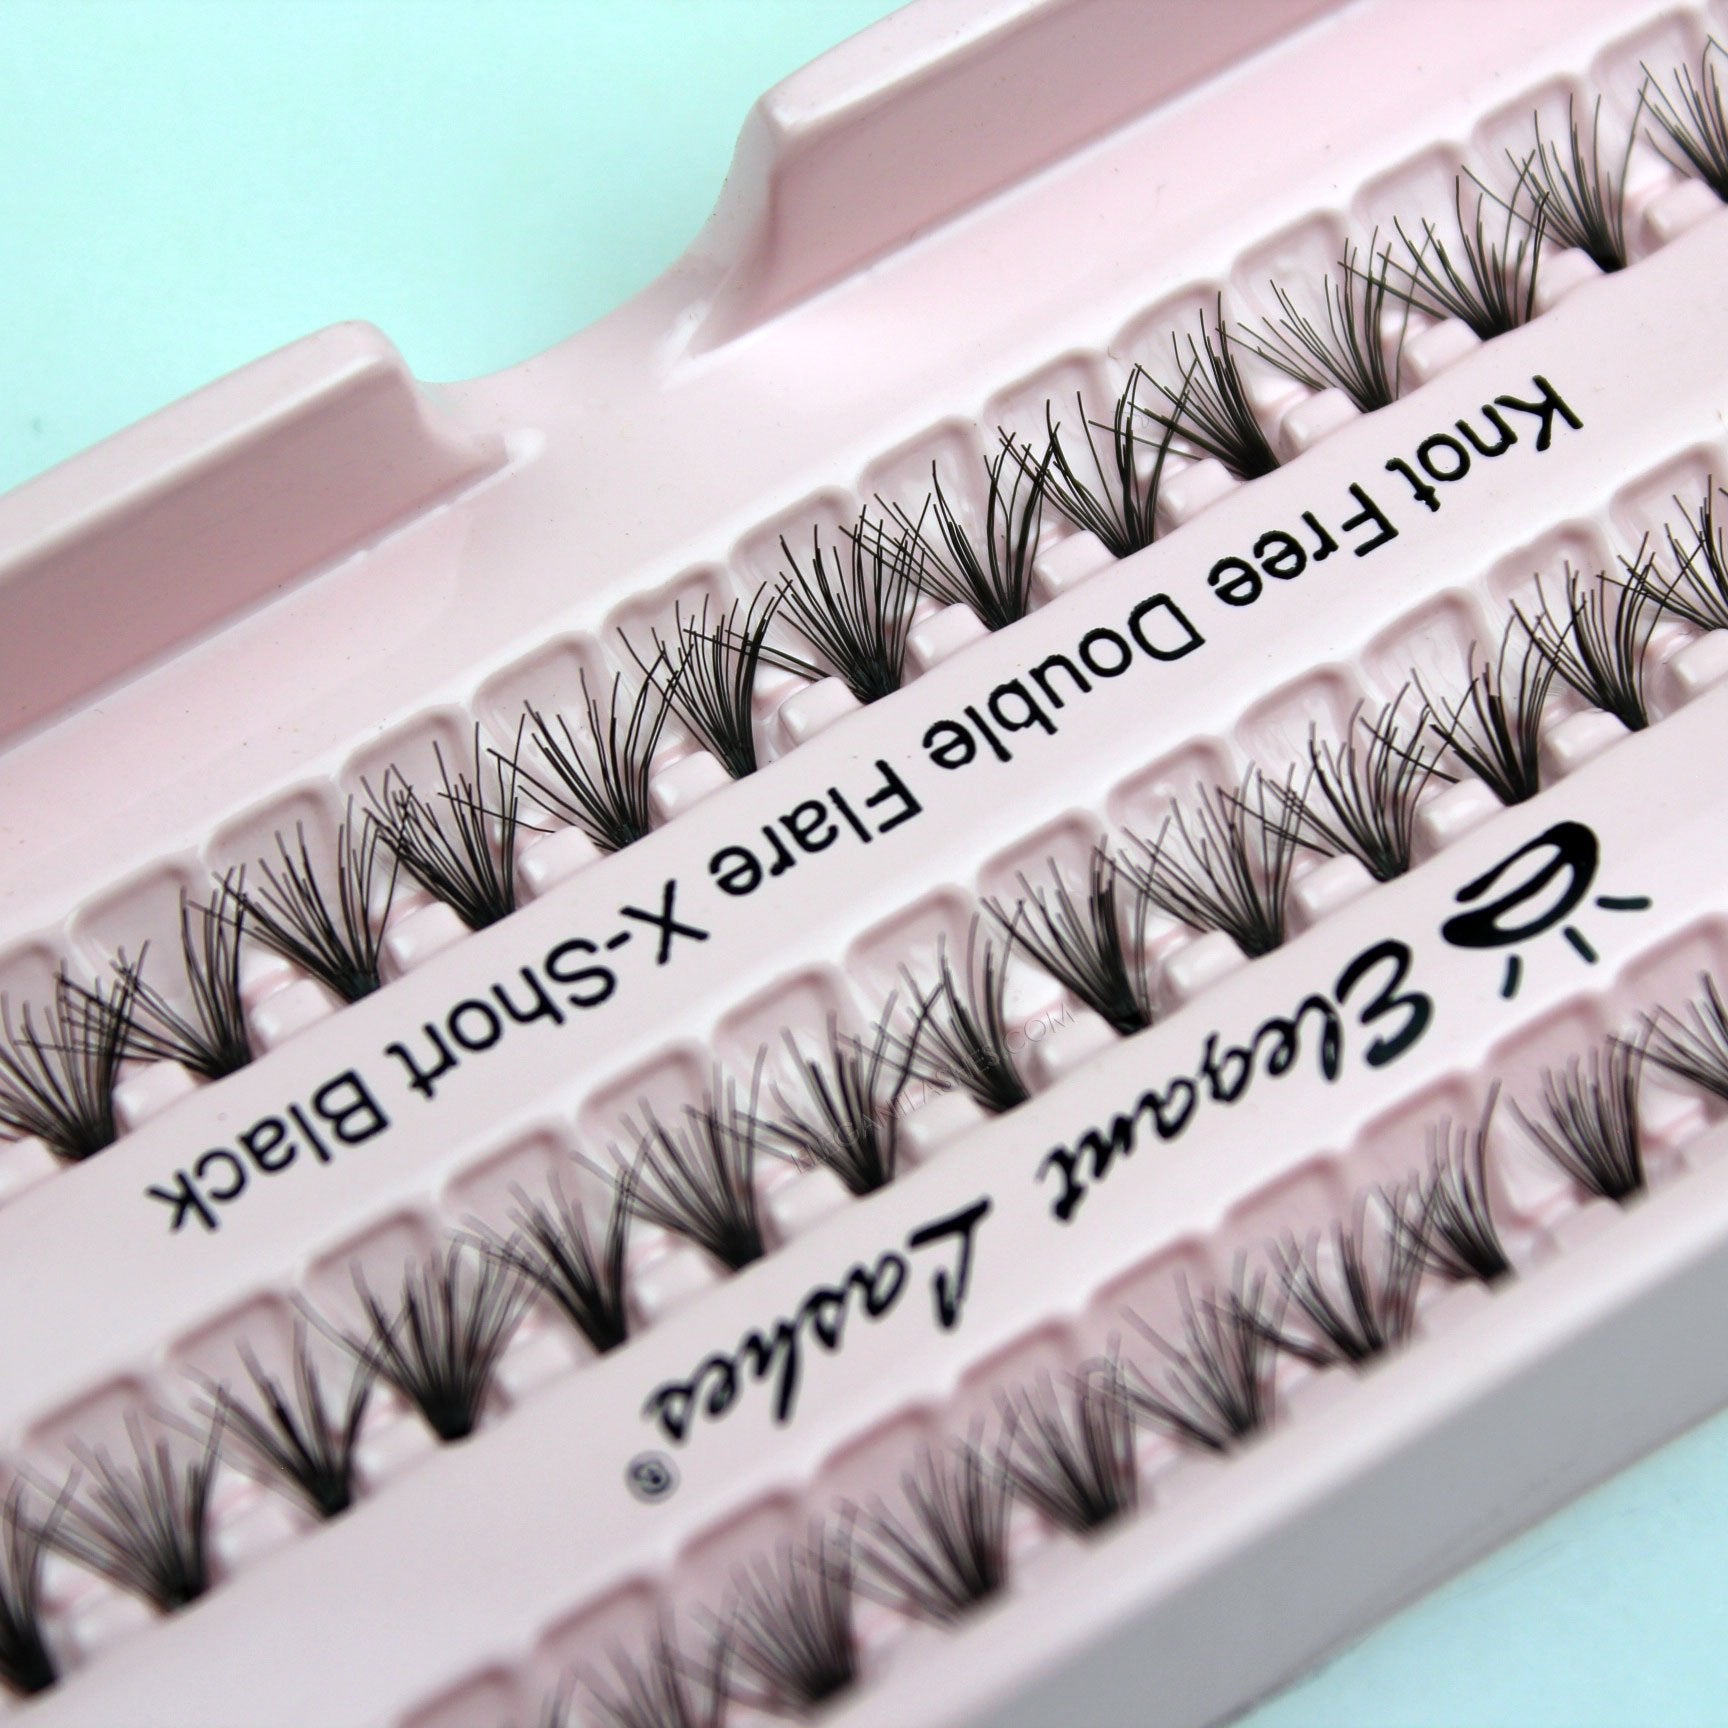 120 Flare Lashes 5D, ultra-light, knot-free